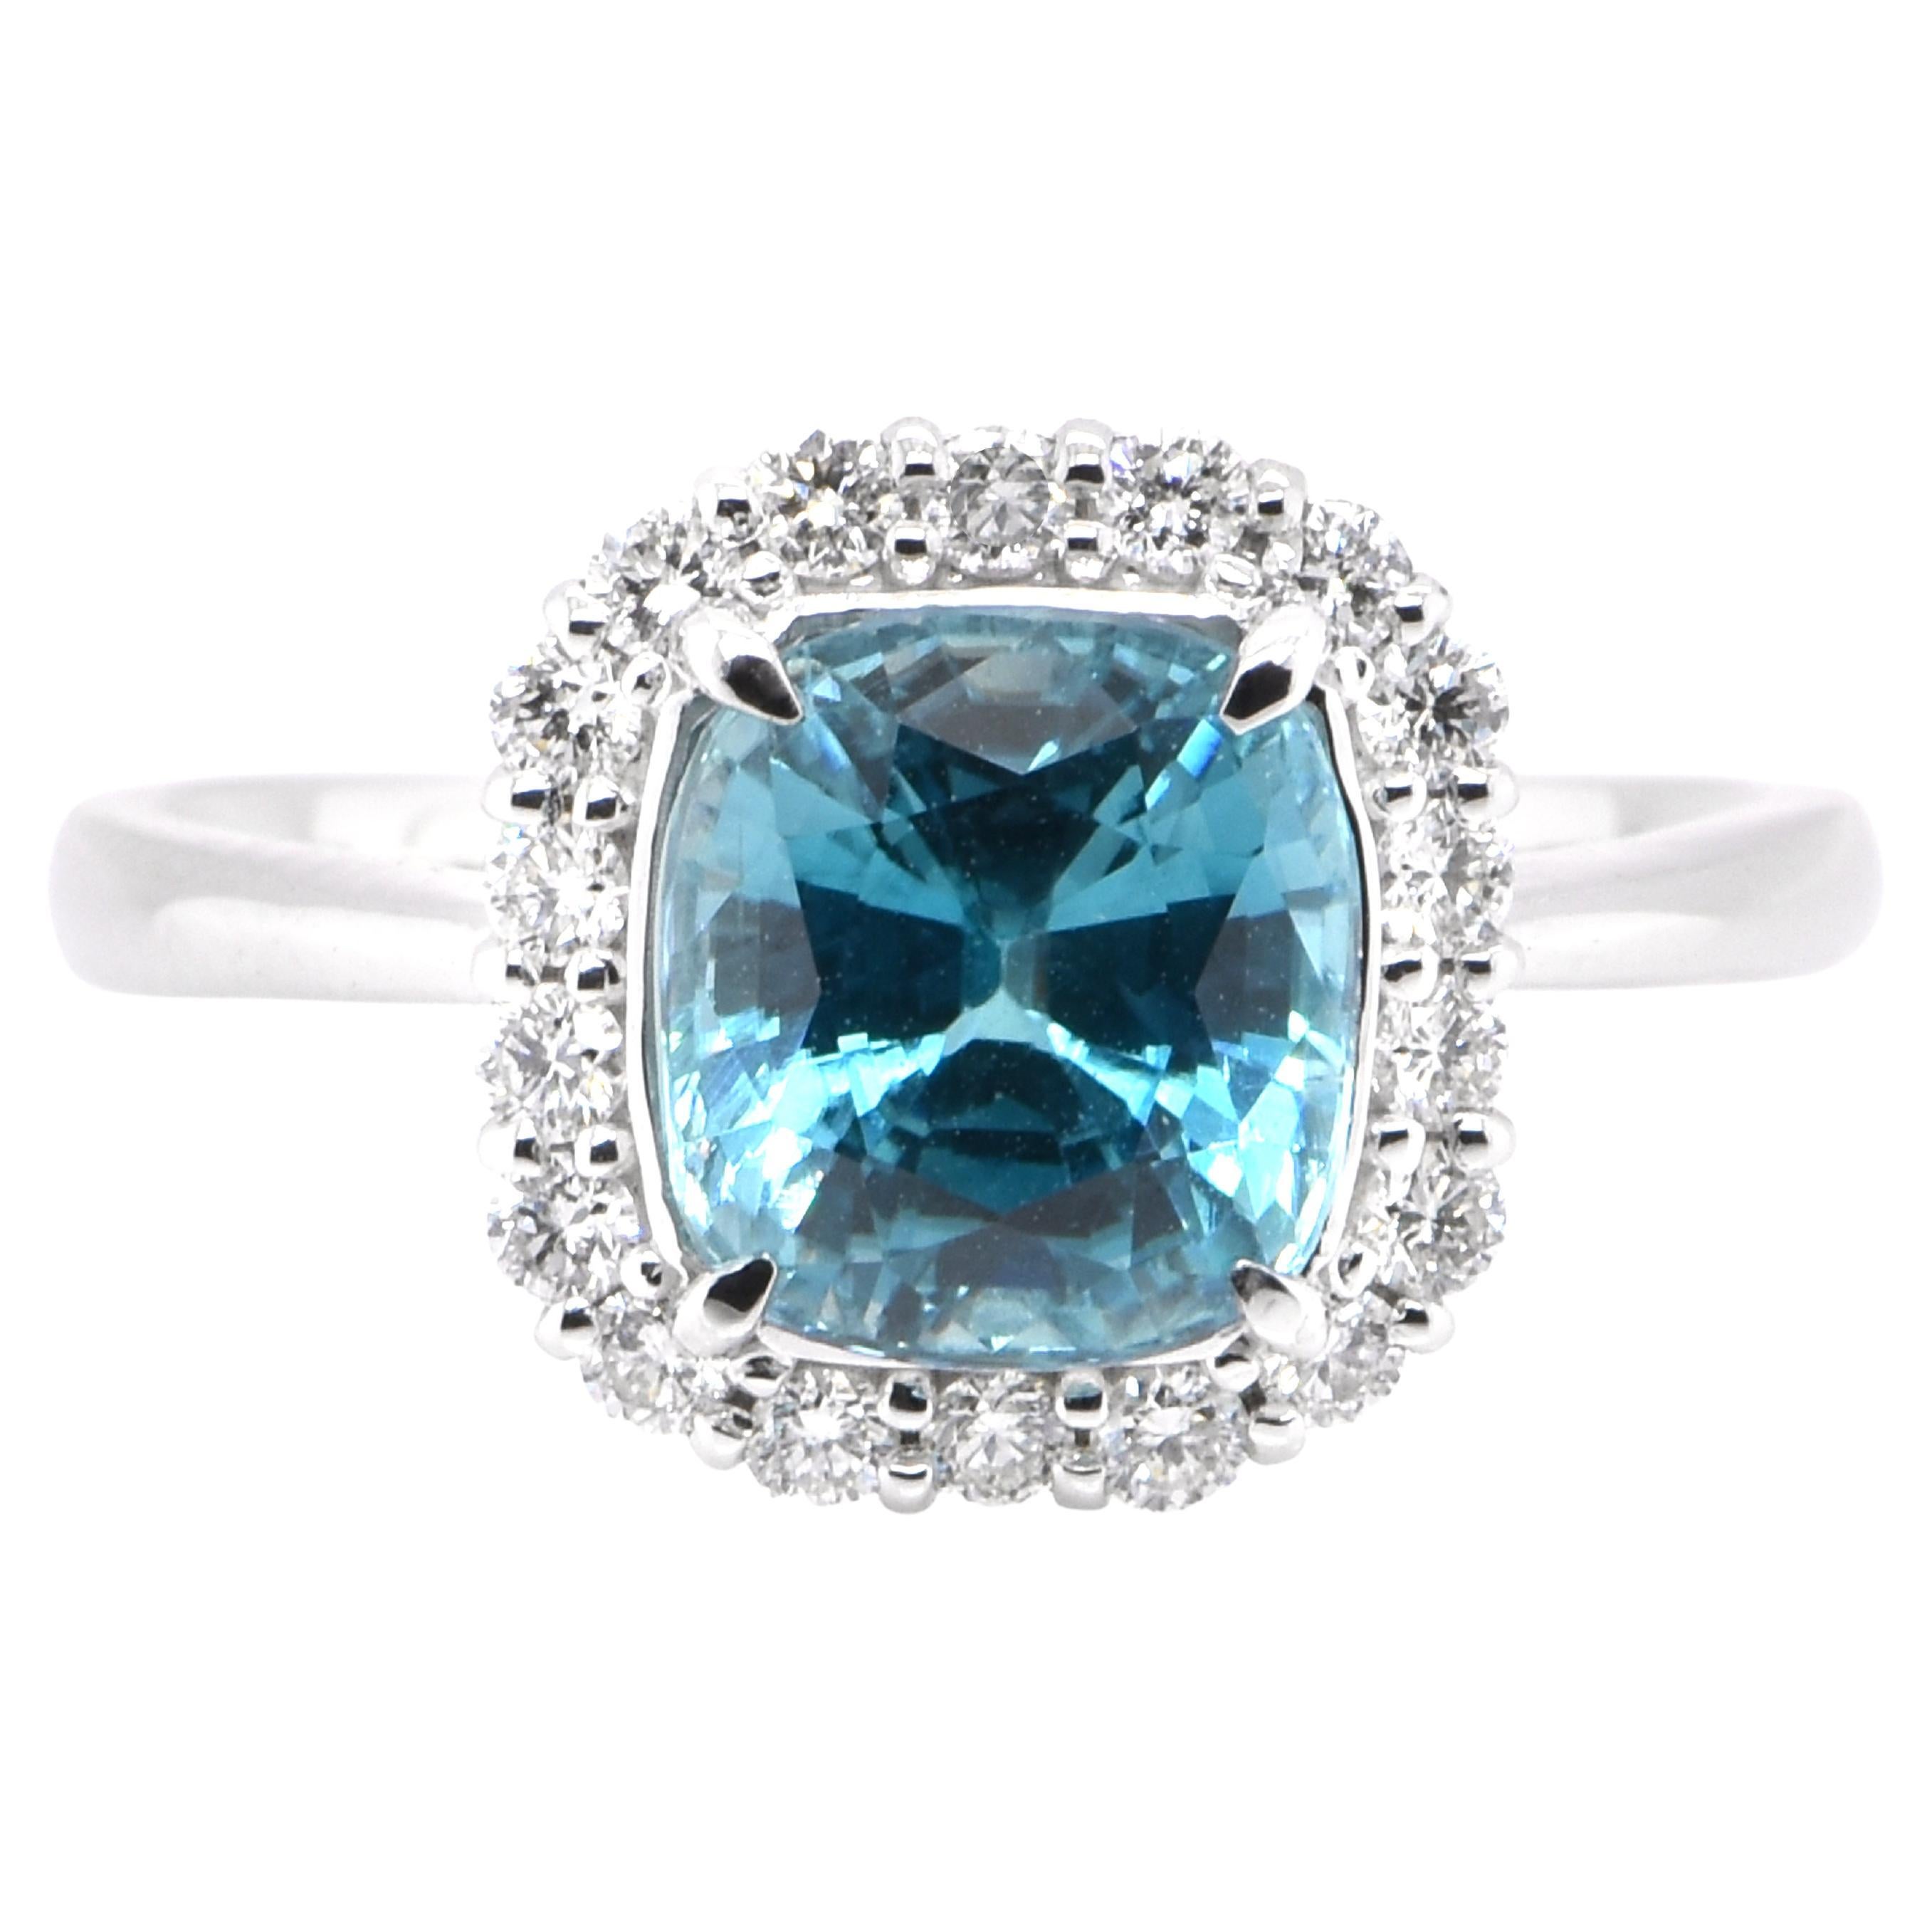 3.84 Carat Natural Cambodian Zircon and Diamond Halo Ring Set in Platinum For Sale